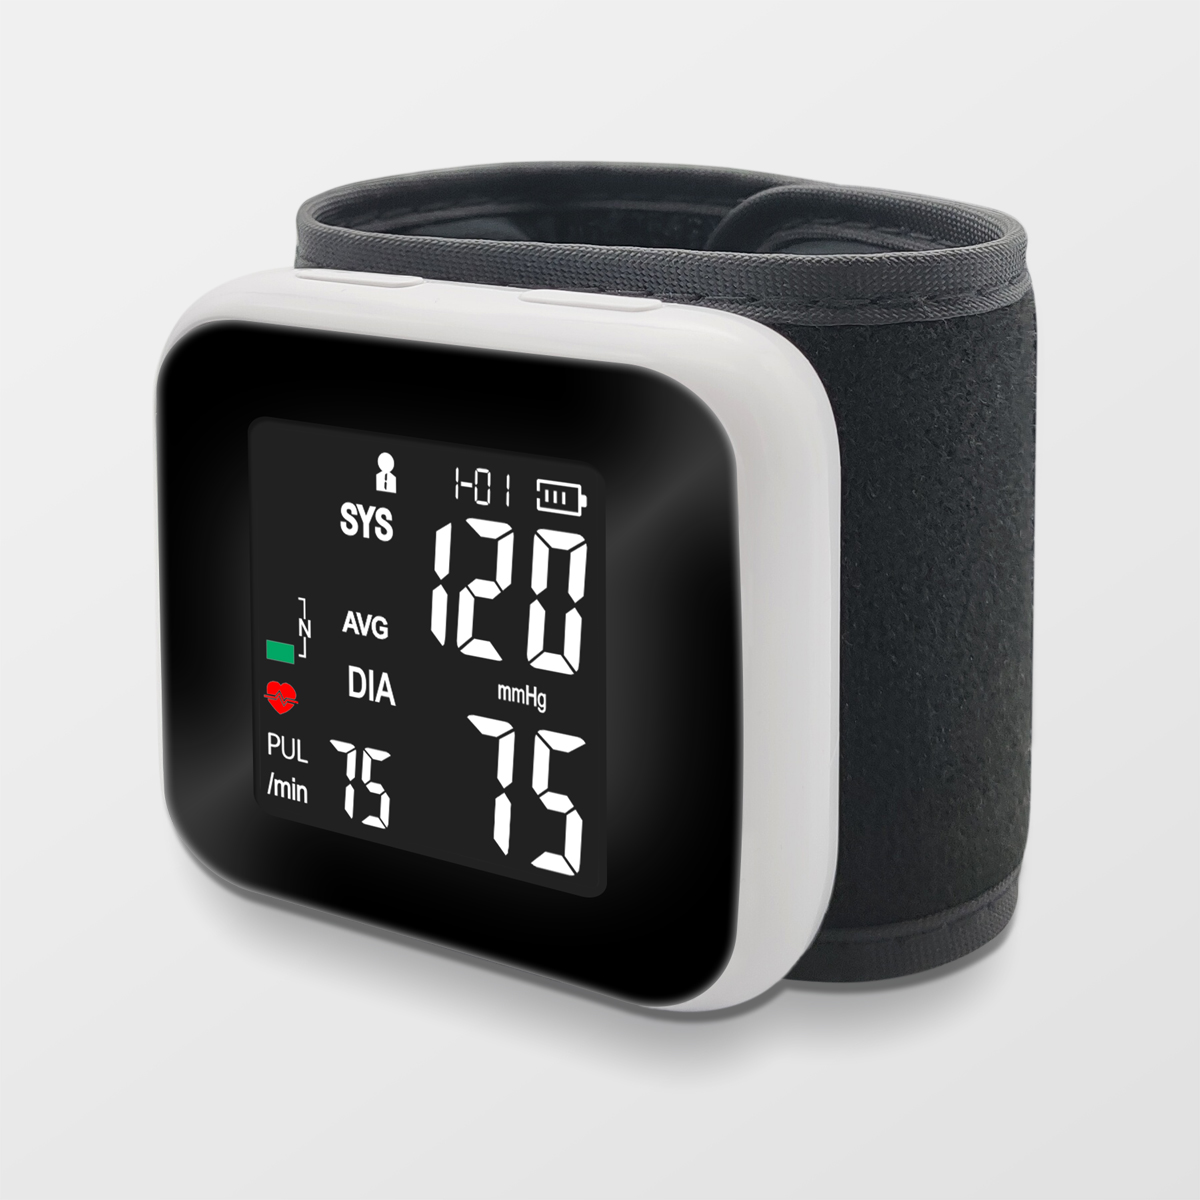 Rechargeable Li Battery High Accuray Wrist Blood Pressure Monitor na may Backlight Display